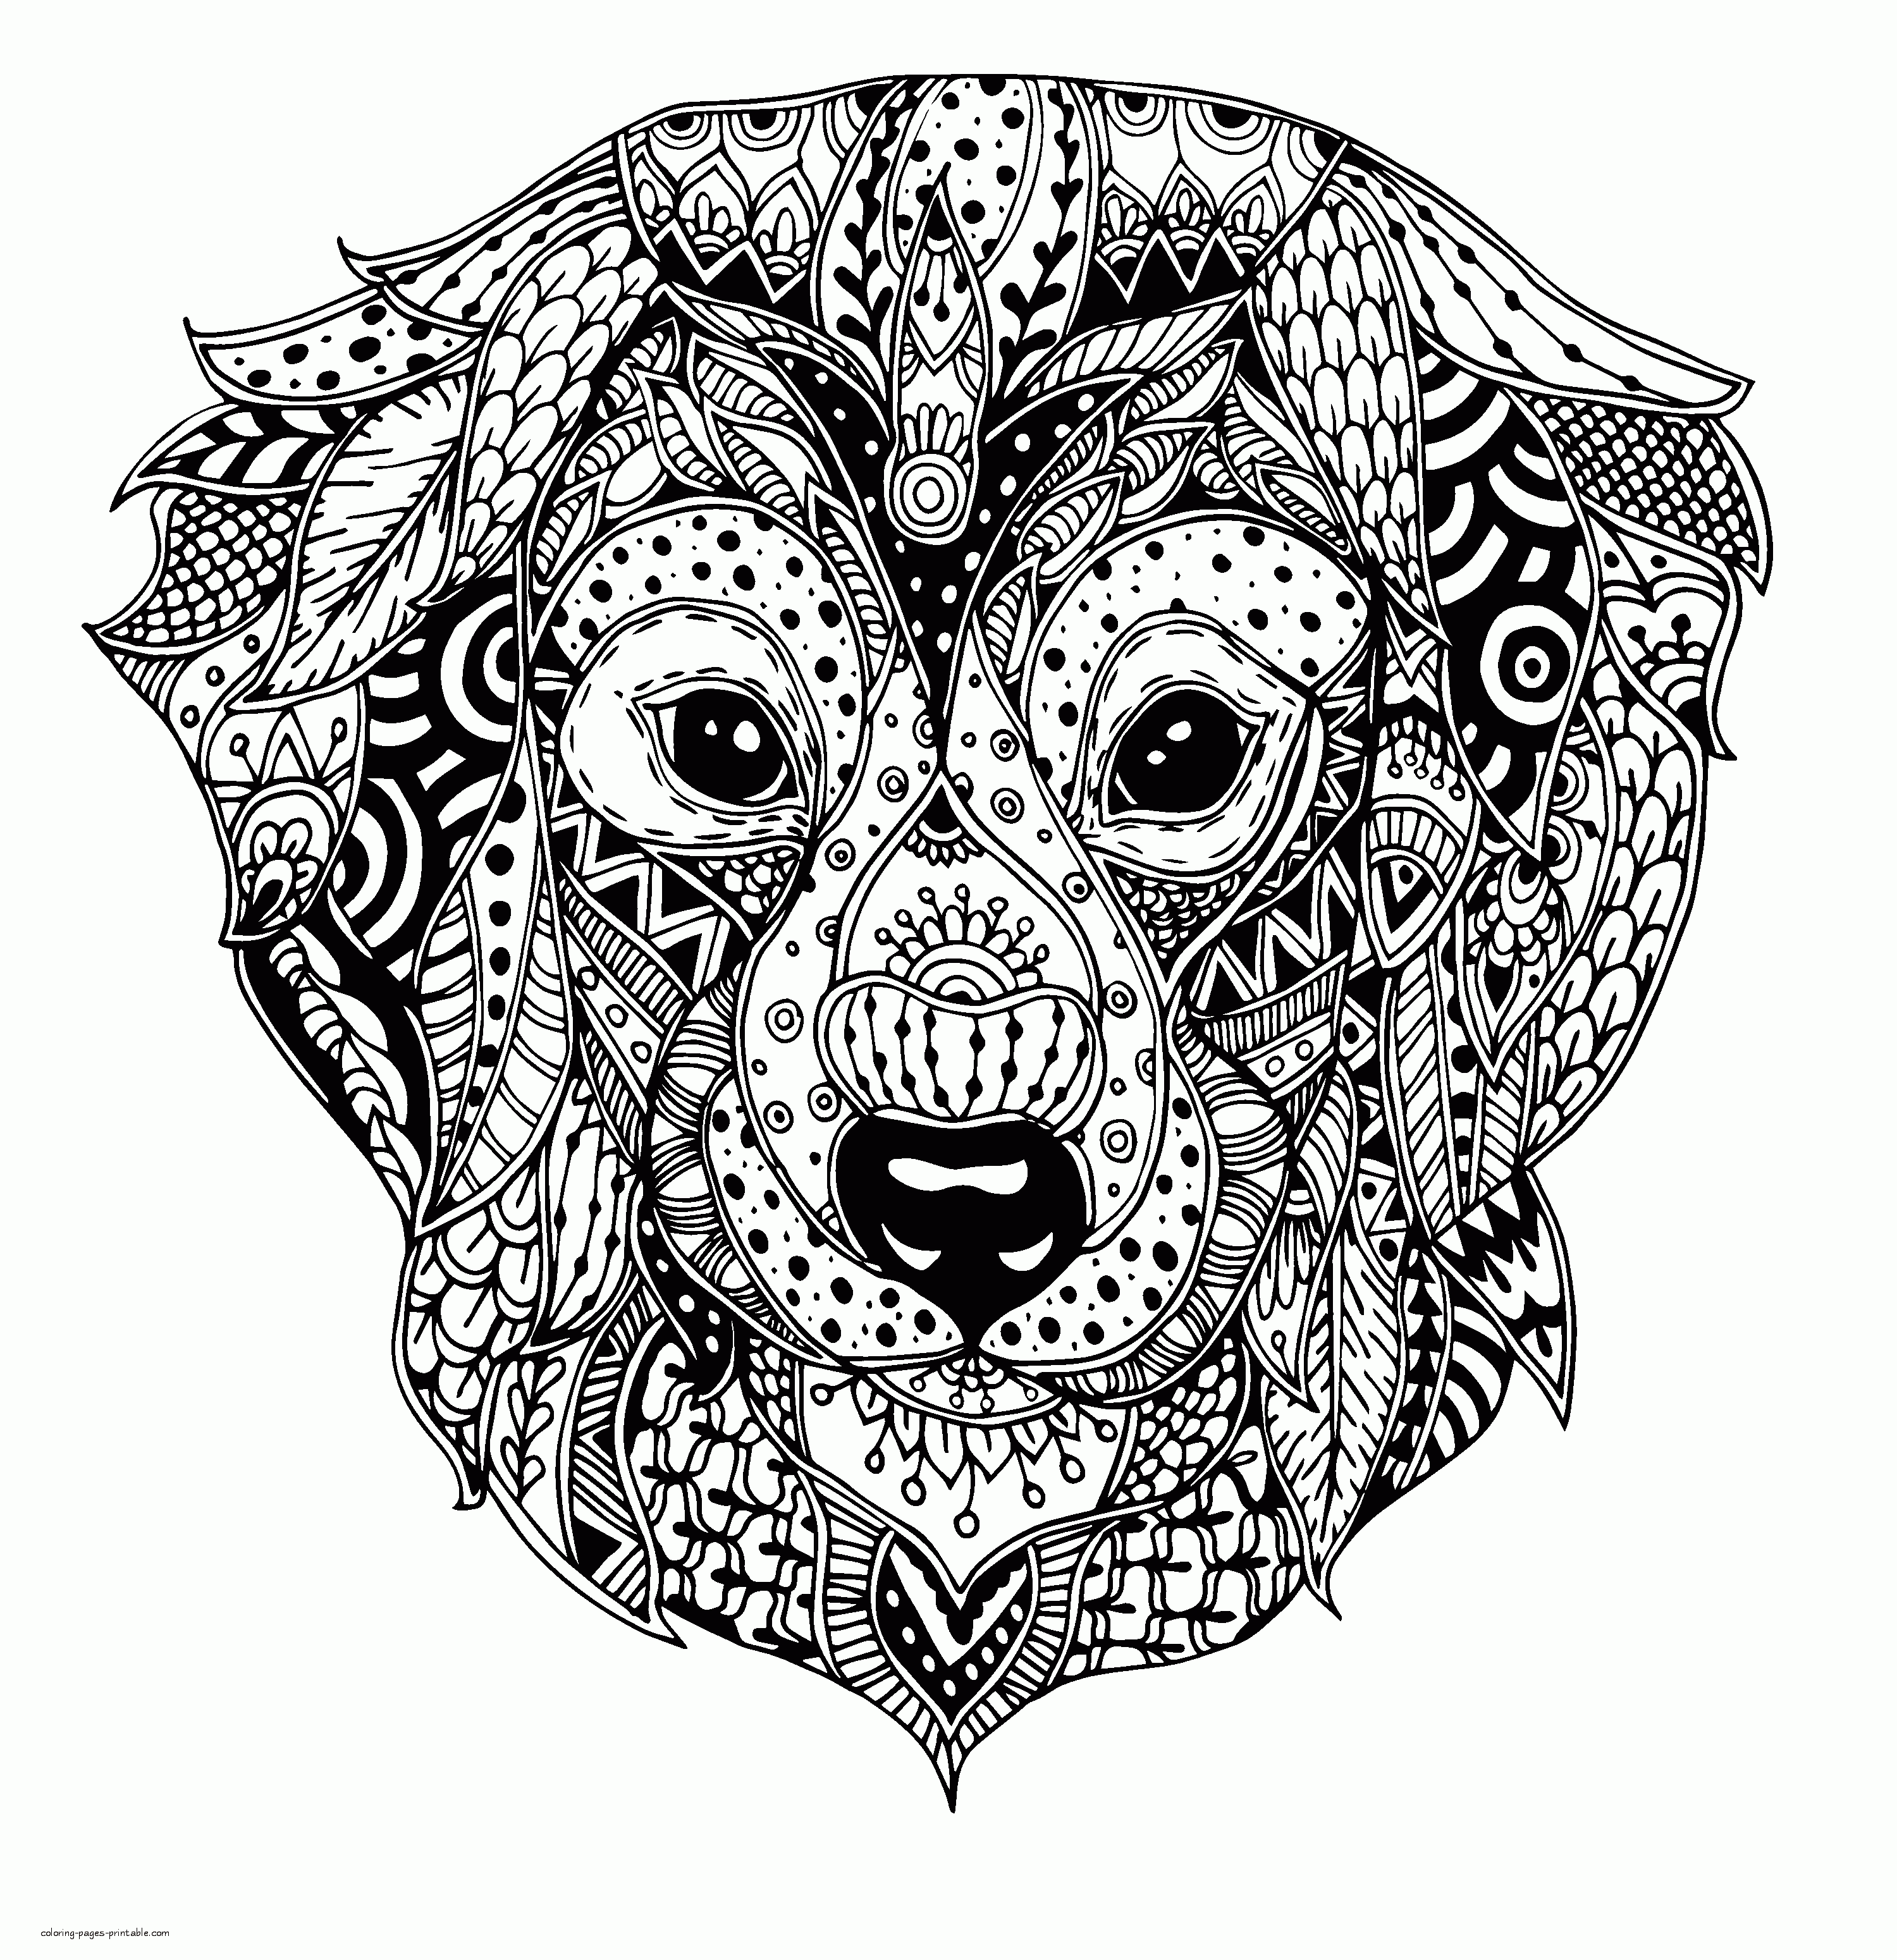 Adult Free Dog Coloring Pages    COLORING PAGES PRINTABLE.COM